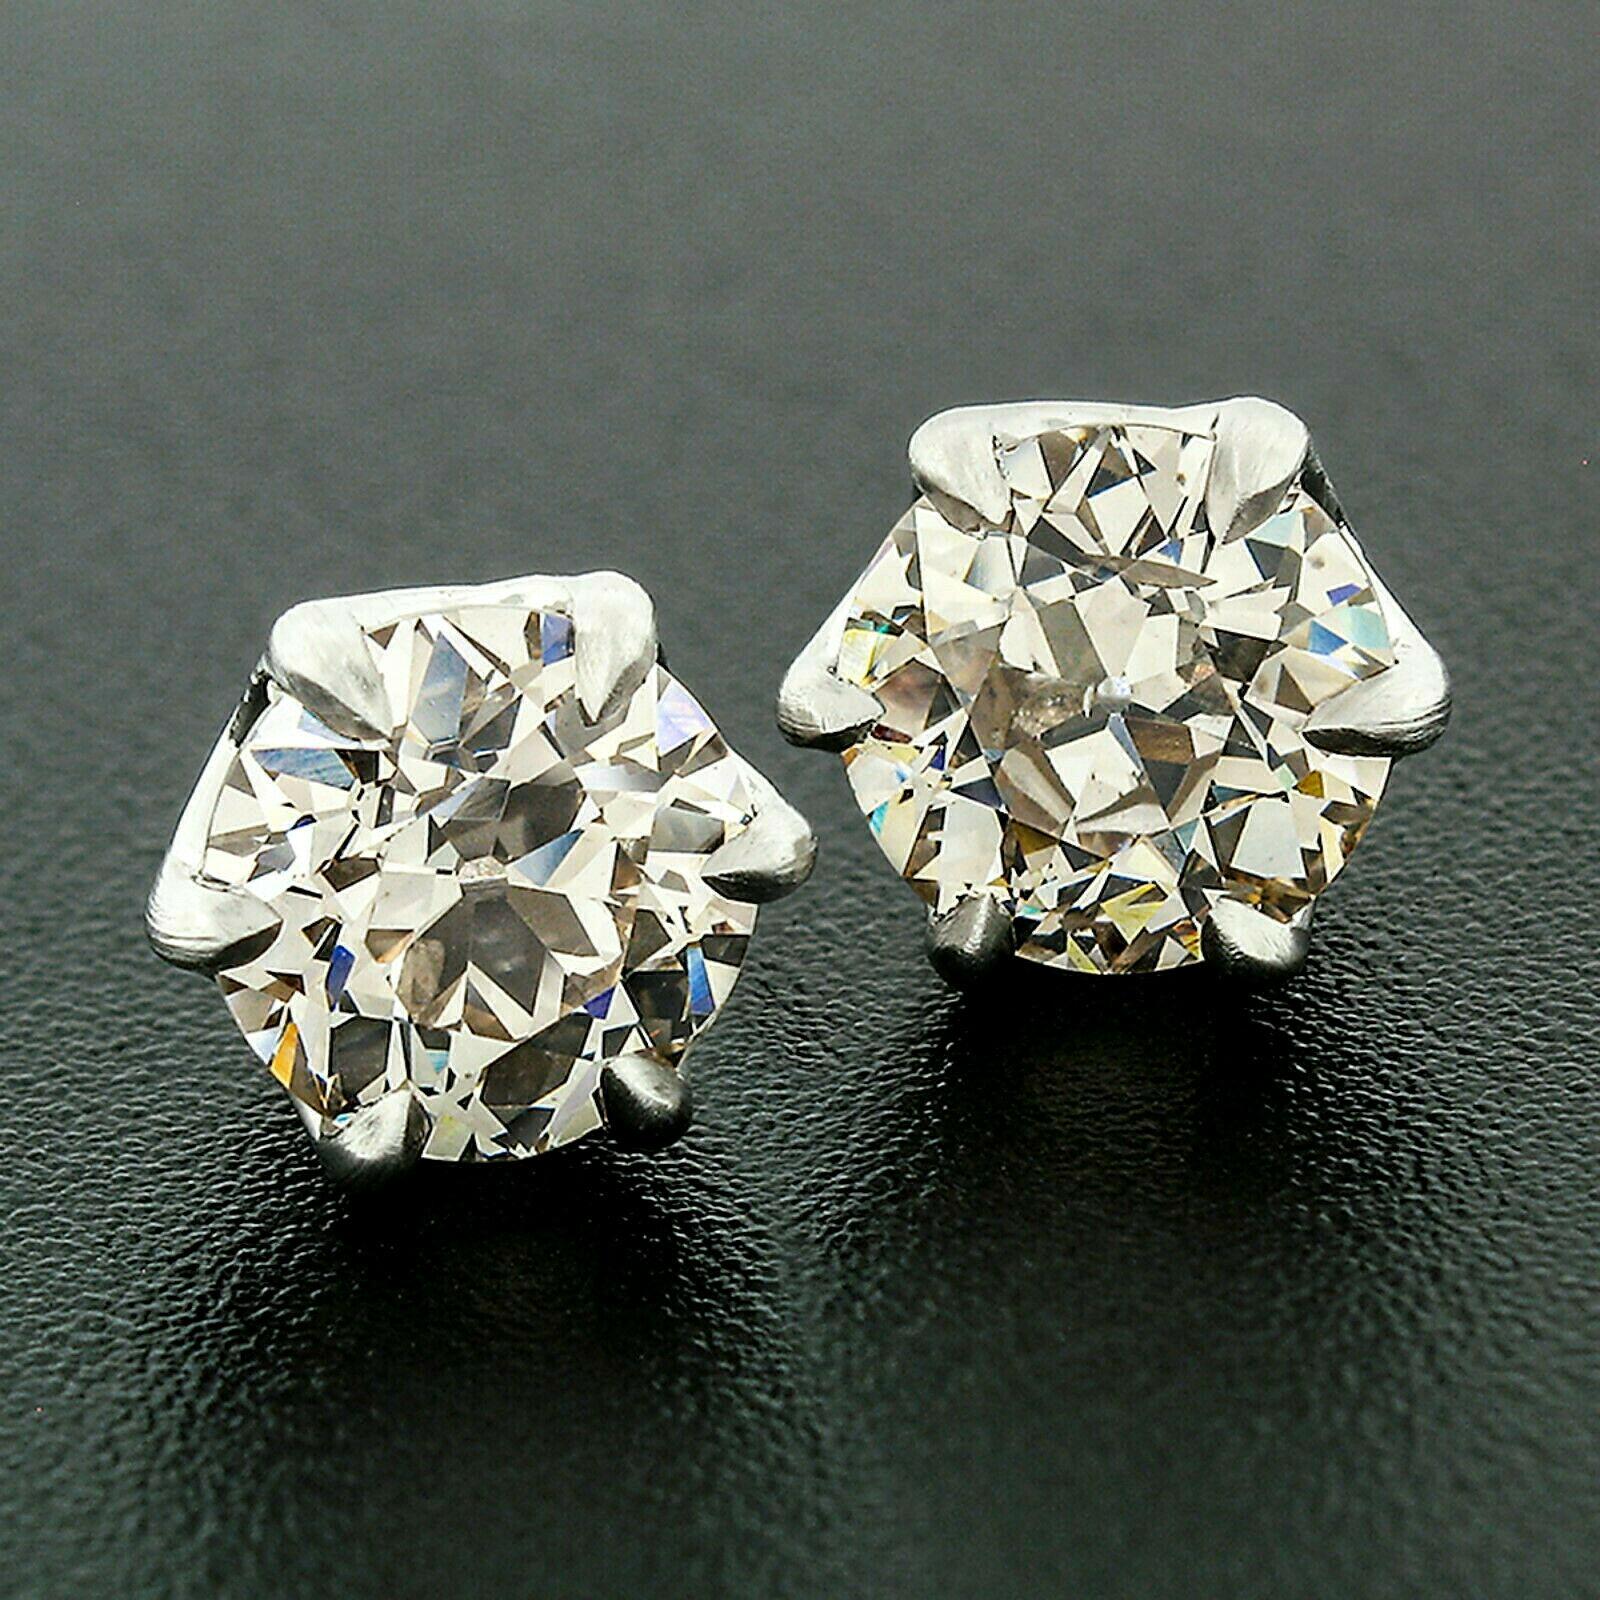 These fancy antique diamond stud earrings are crafted in new and secured solid platinum mountings. They feature a total of 3.17 carats in 2 old European cut diamonds perfectly claw prong set in the well and solidly made baskets. The diamonds are